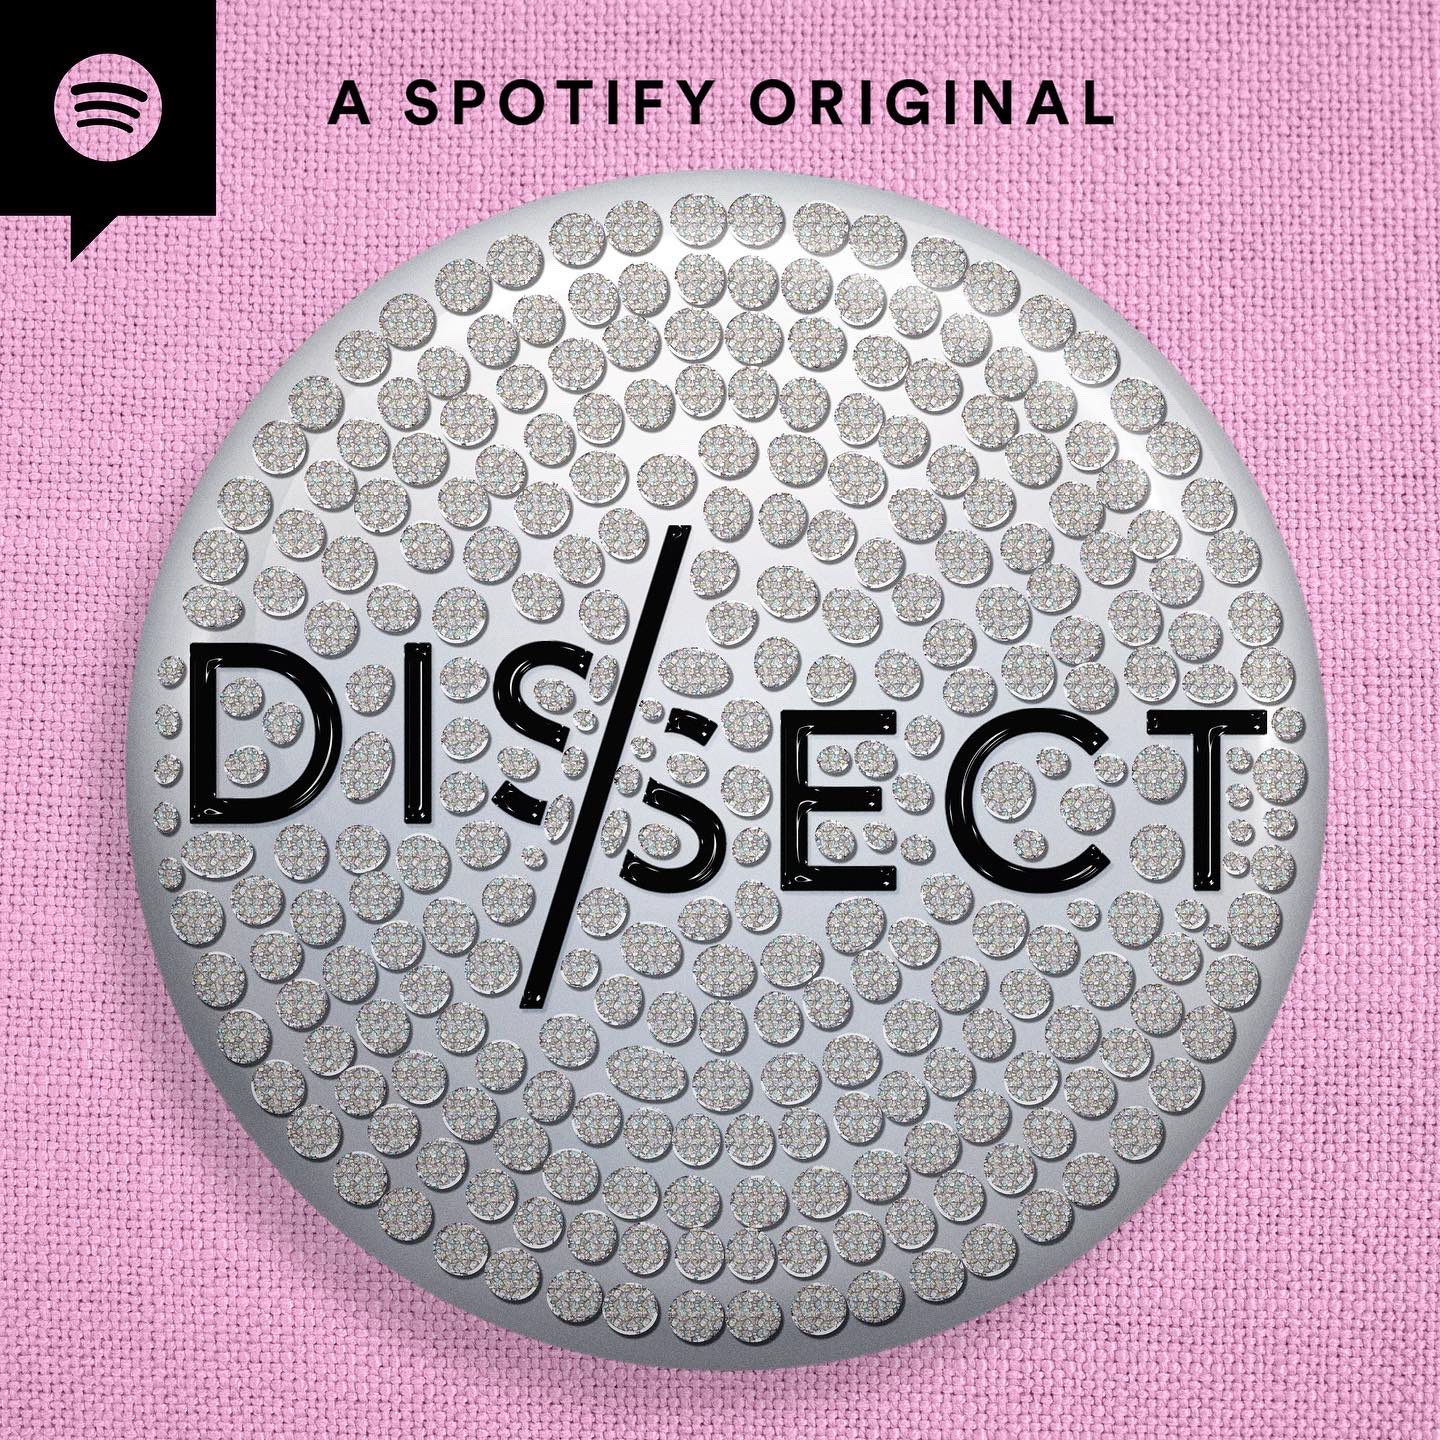 A logo for the Dissect podcast is pictured